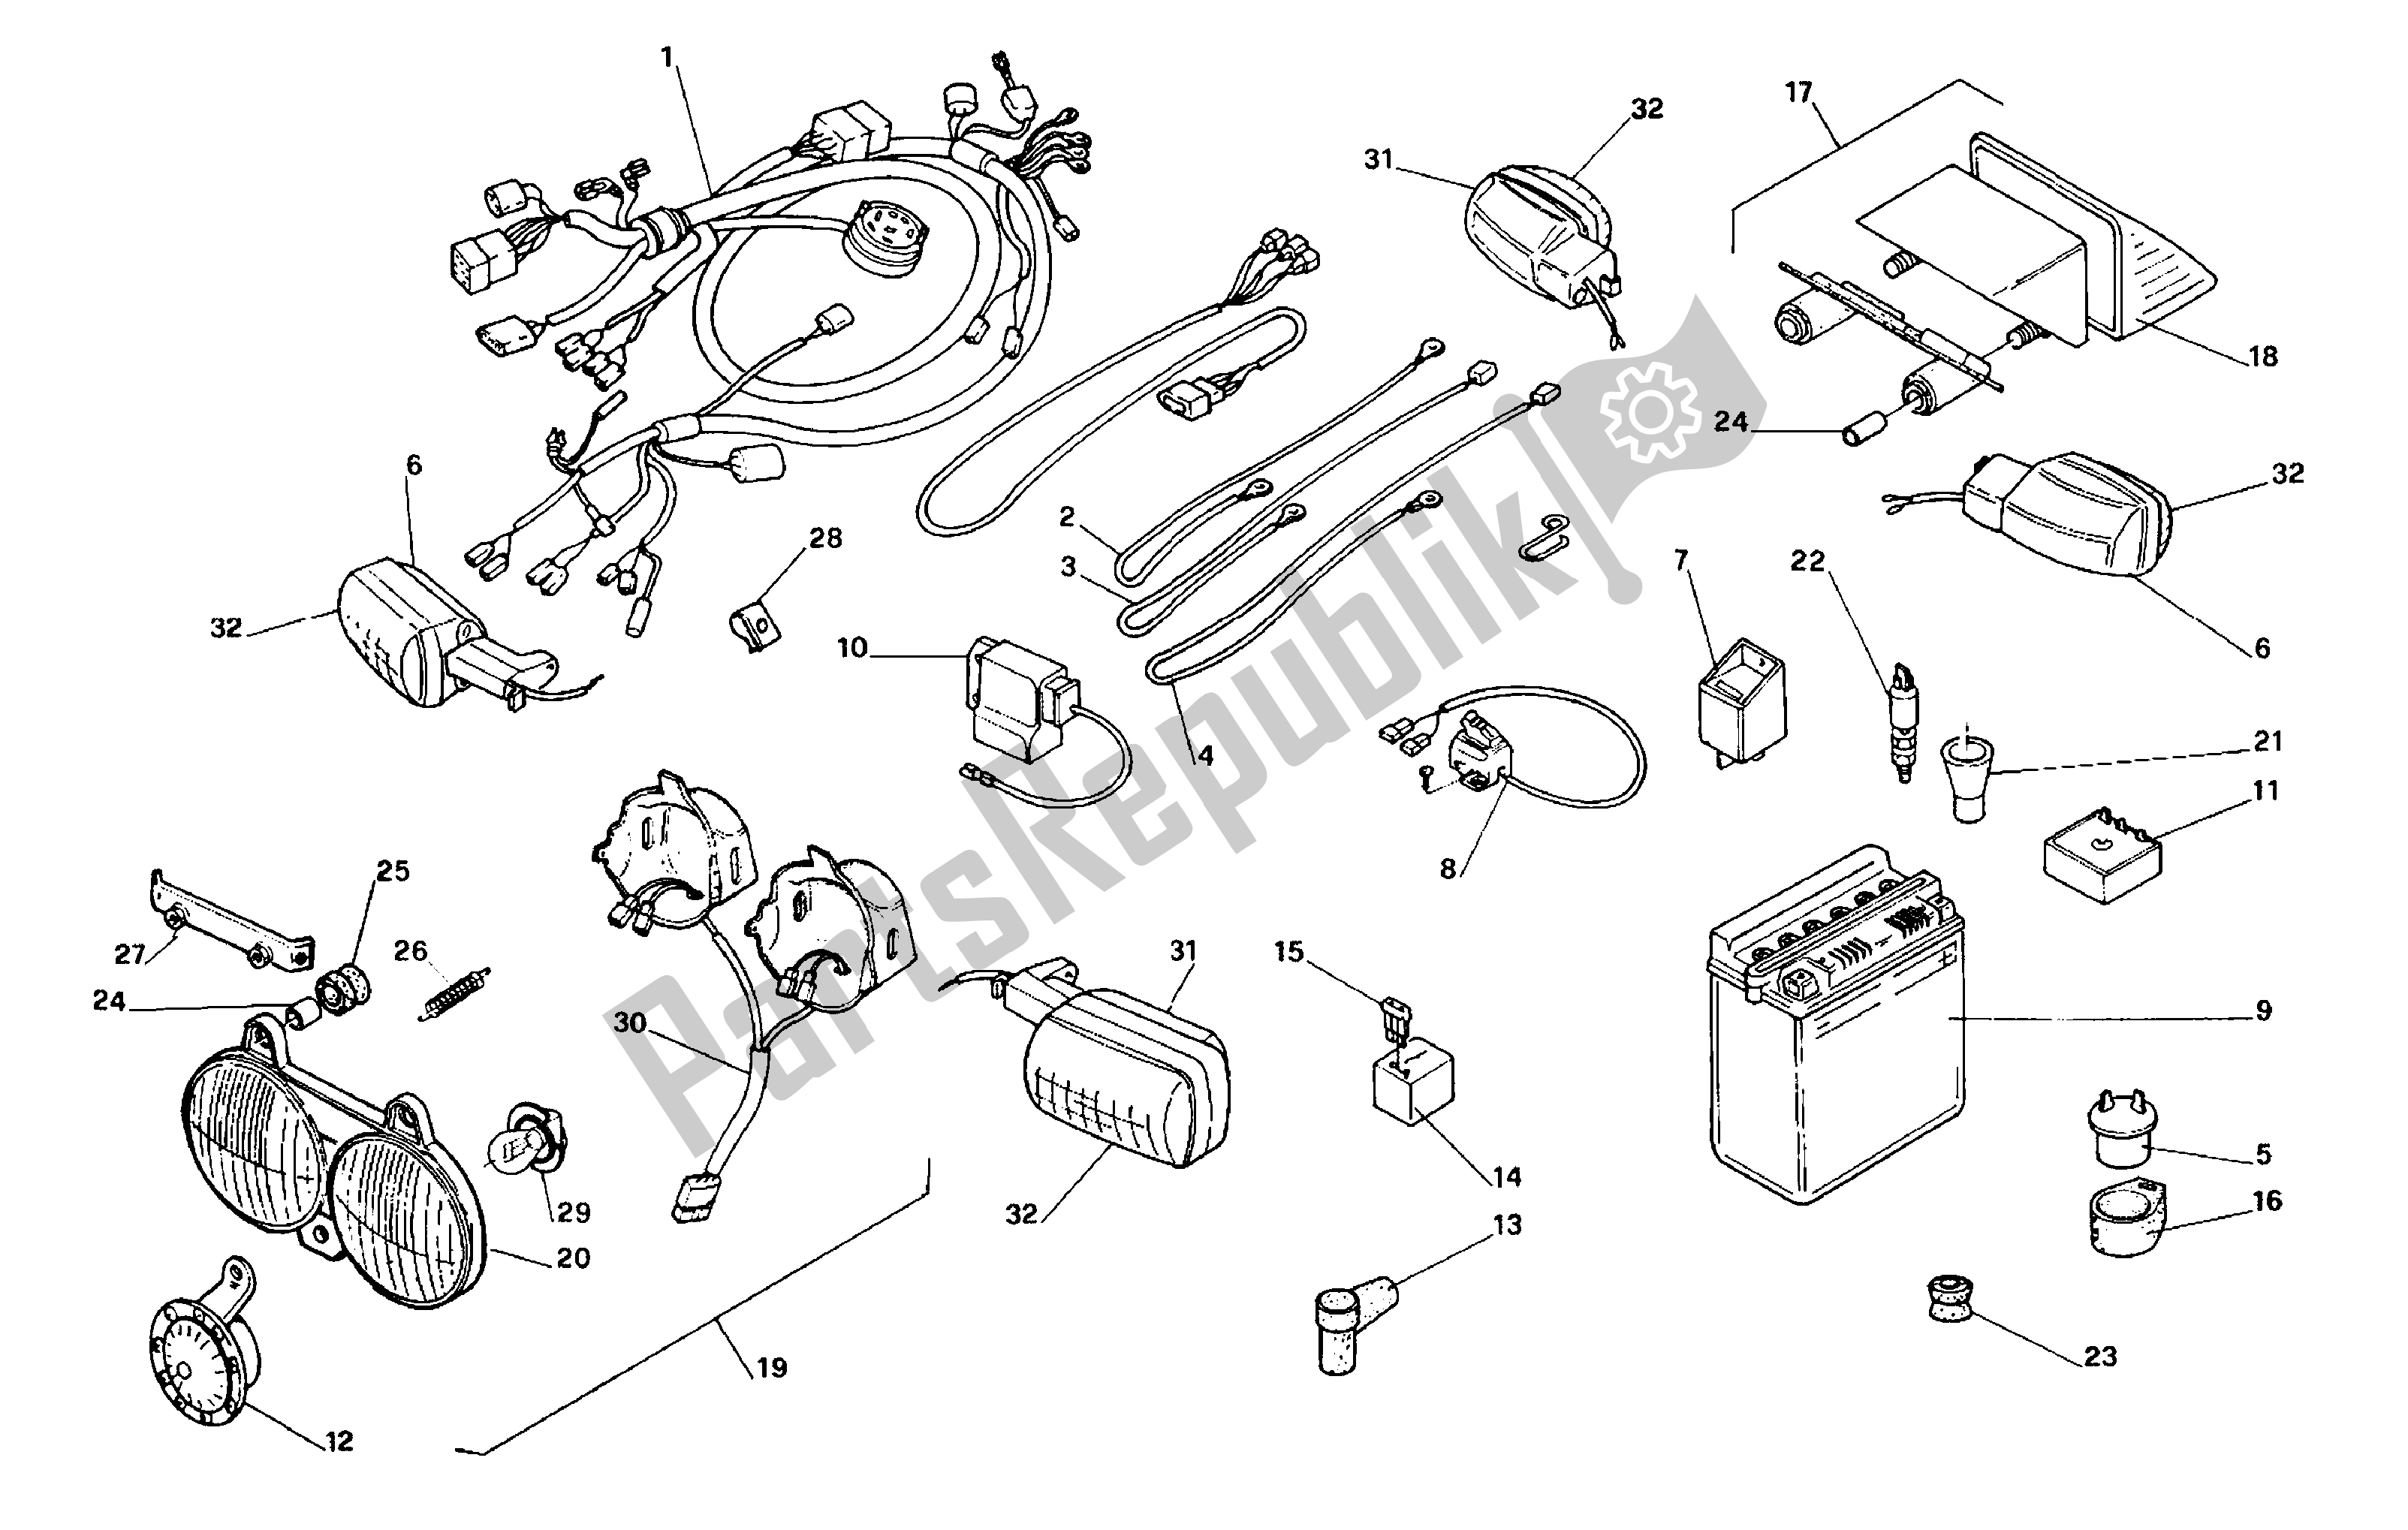 All parts for the Electrical System of the Aprilia Tuareg 50 1990 - 1992